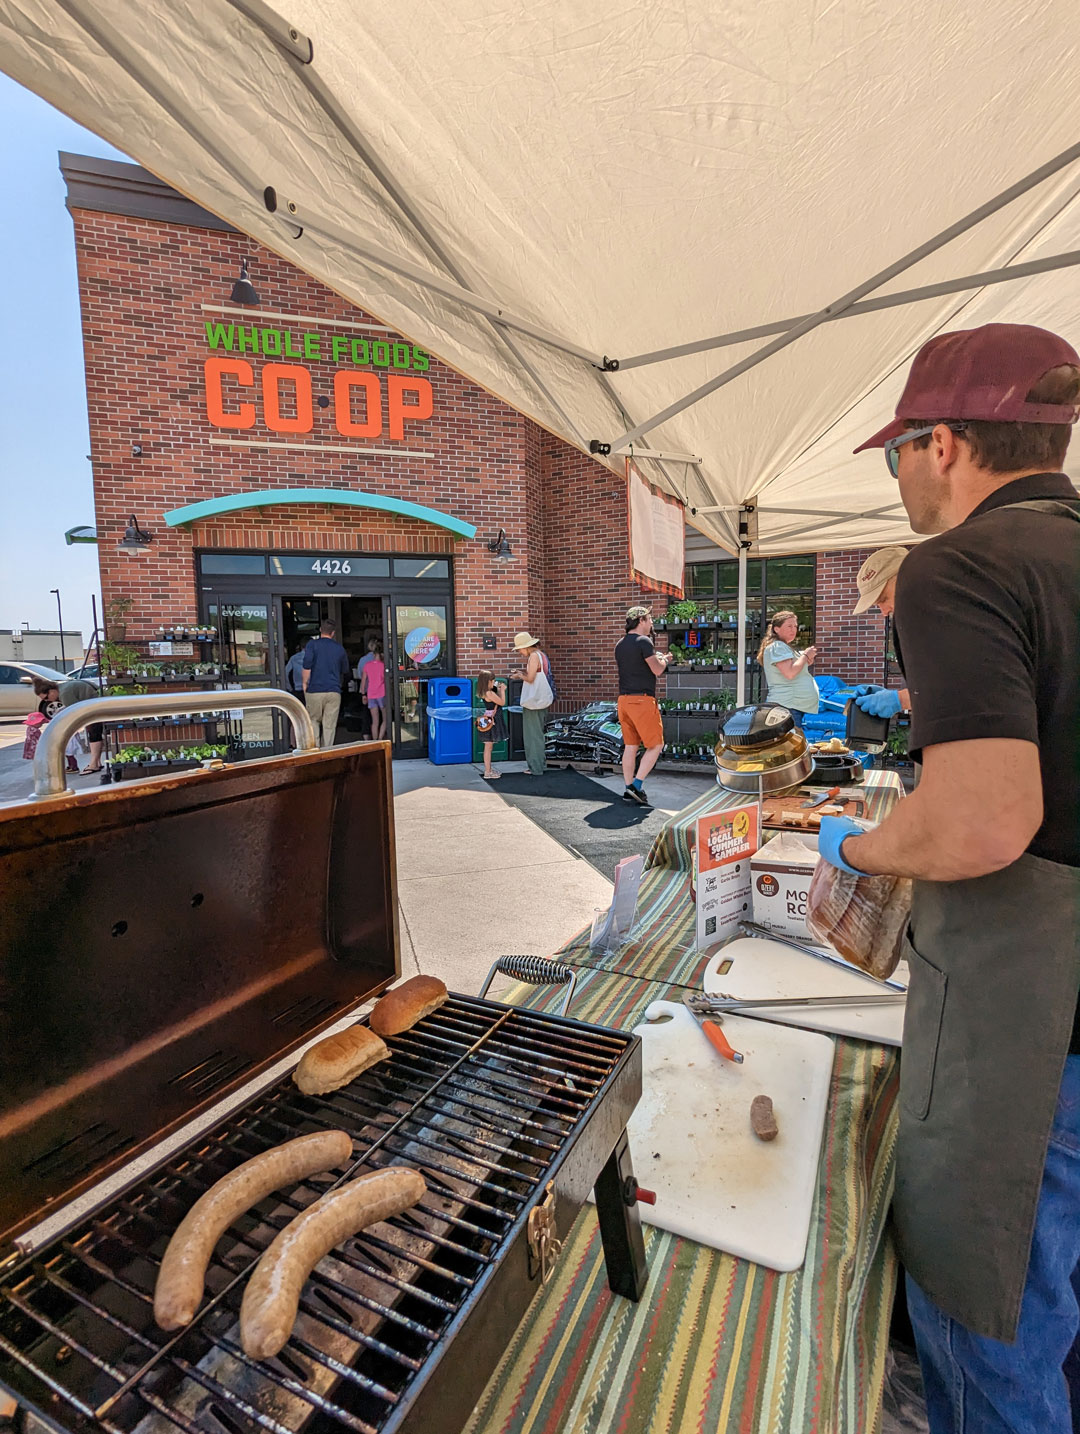 A vendor cooks sausages on a grill under a tent outside the Whole Foods Co-op Duluth MN store. Several people are gathered around, some shopping and others talking. The storefront is brick, and there is a sign reading "WHOLE FOODS CO OP" above the entrance.